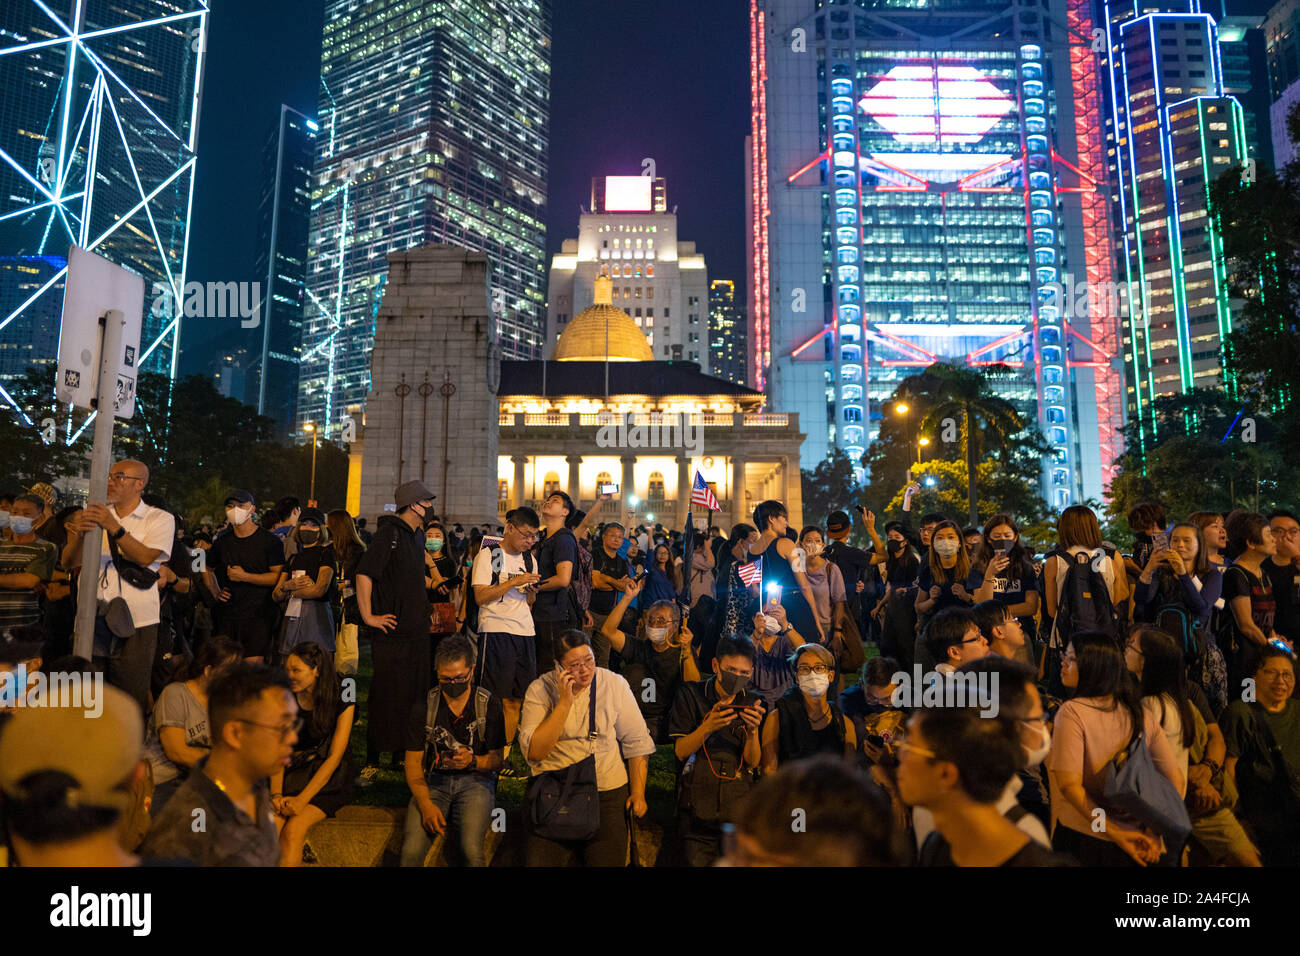 Hong Kong. 14th October 2019. Tens of thousands of pro-democracy demonstrators  attended a peaceful rally in Chater Garden in Central on Monday night, calling on the US to pass the Hong Kong Human Rights and Democracy Act of 2019 that would sanction officials who undermine people's rights in the Hong Kong SAR ( Special Administrative region). Many Stars and Stripes flags and pro-USA slogans were displayed by the demonstrators. Iain Masterton/Alamy Live News. Stock Photo